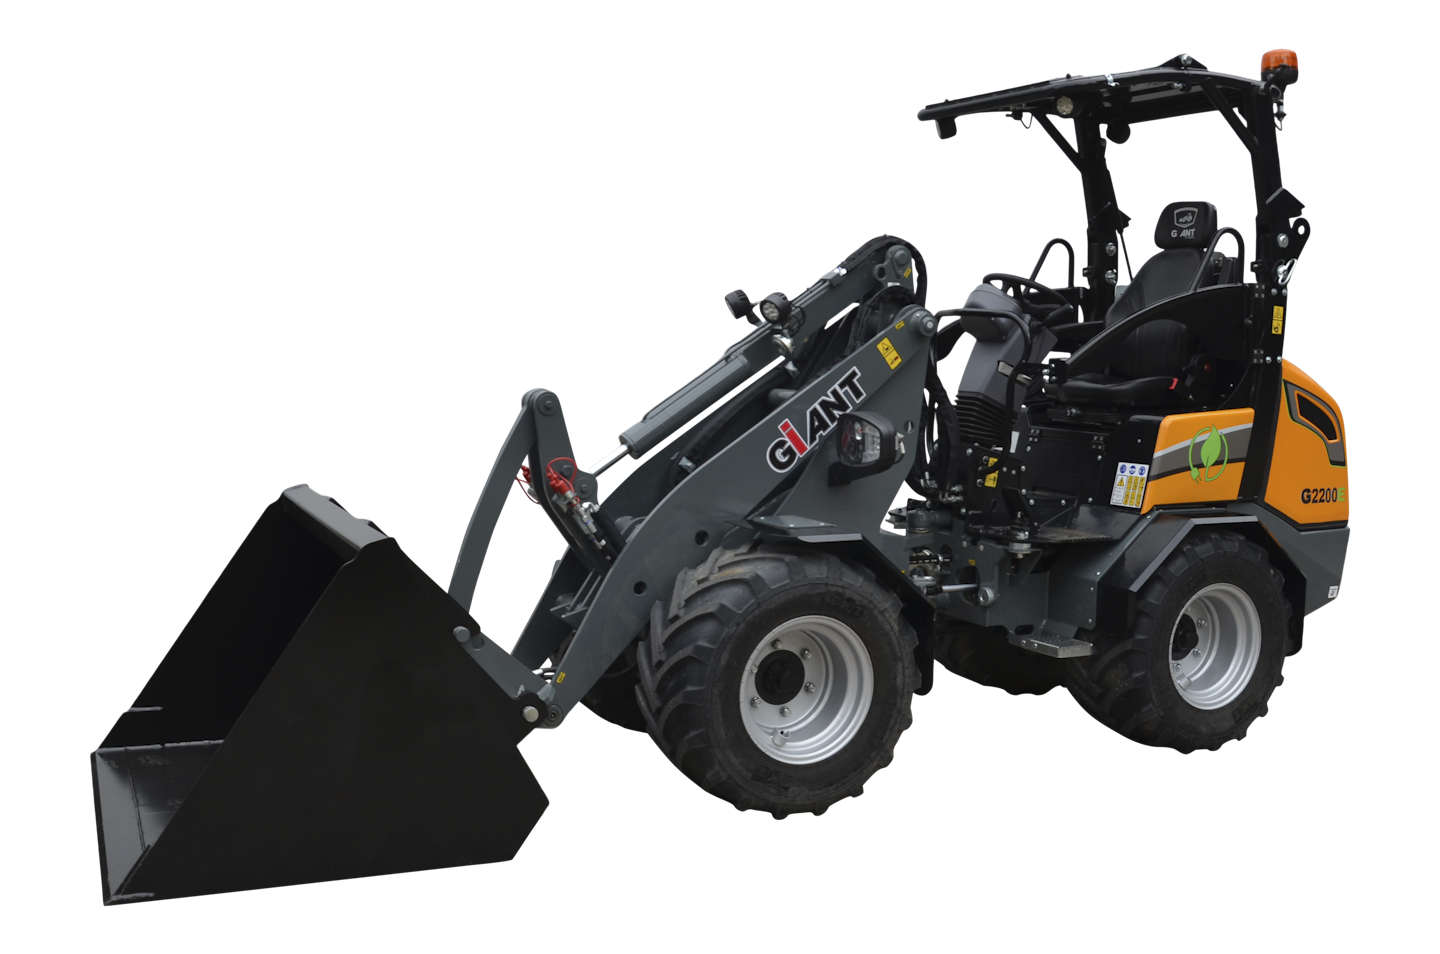 TobrocoGiant unveils G2200E, its first electric compact wheel loader